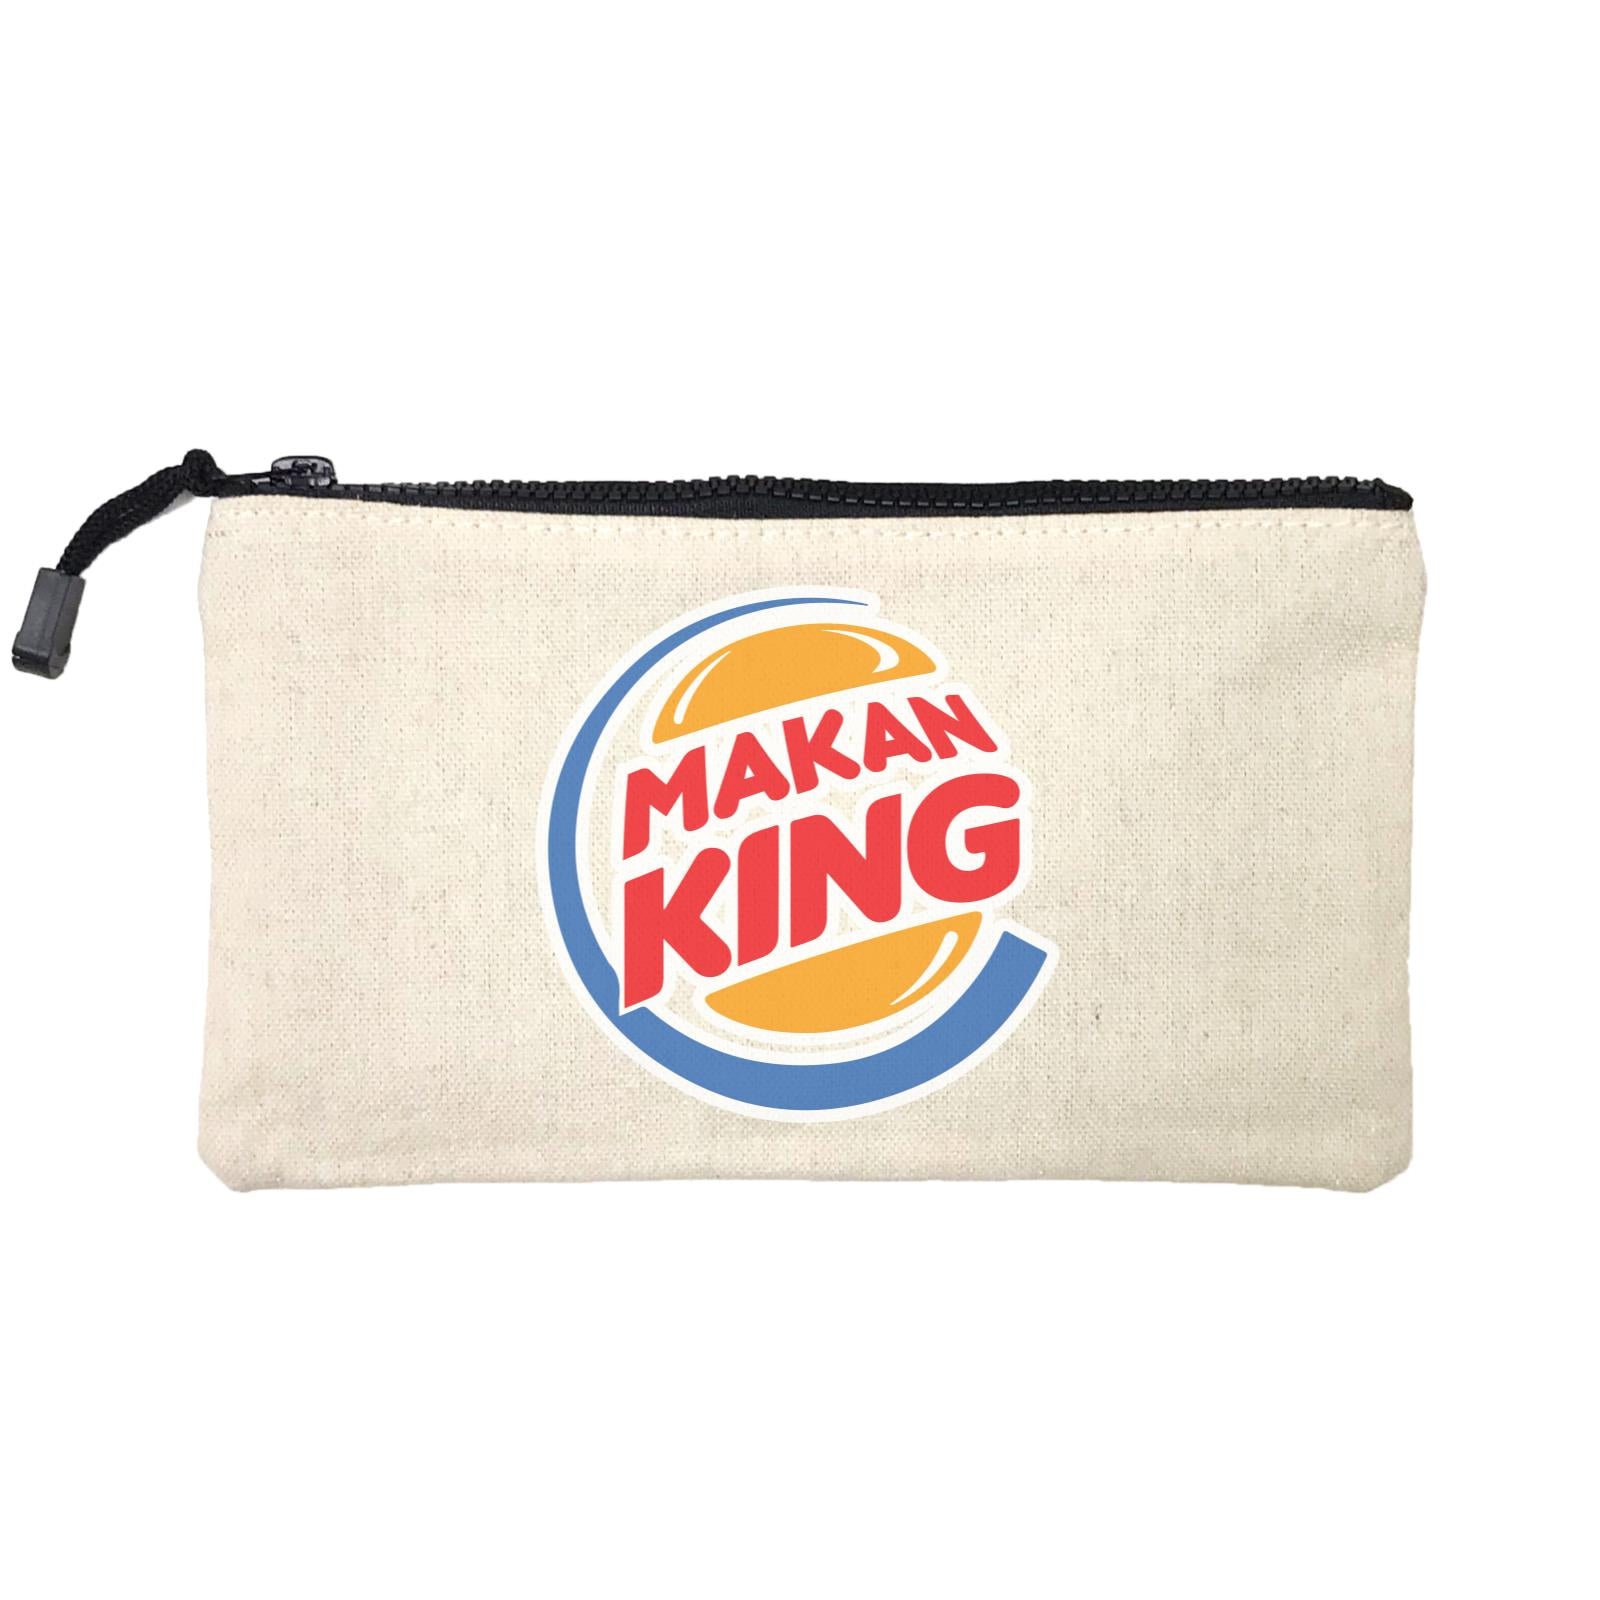 Slang Statement Makan King SP Stationery Pouch